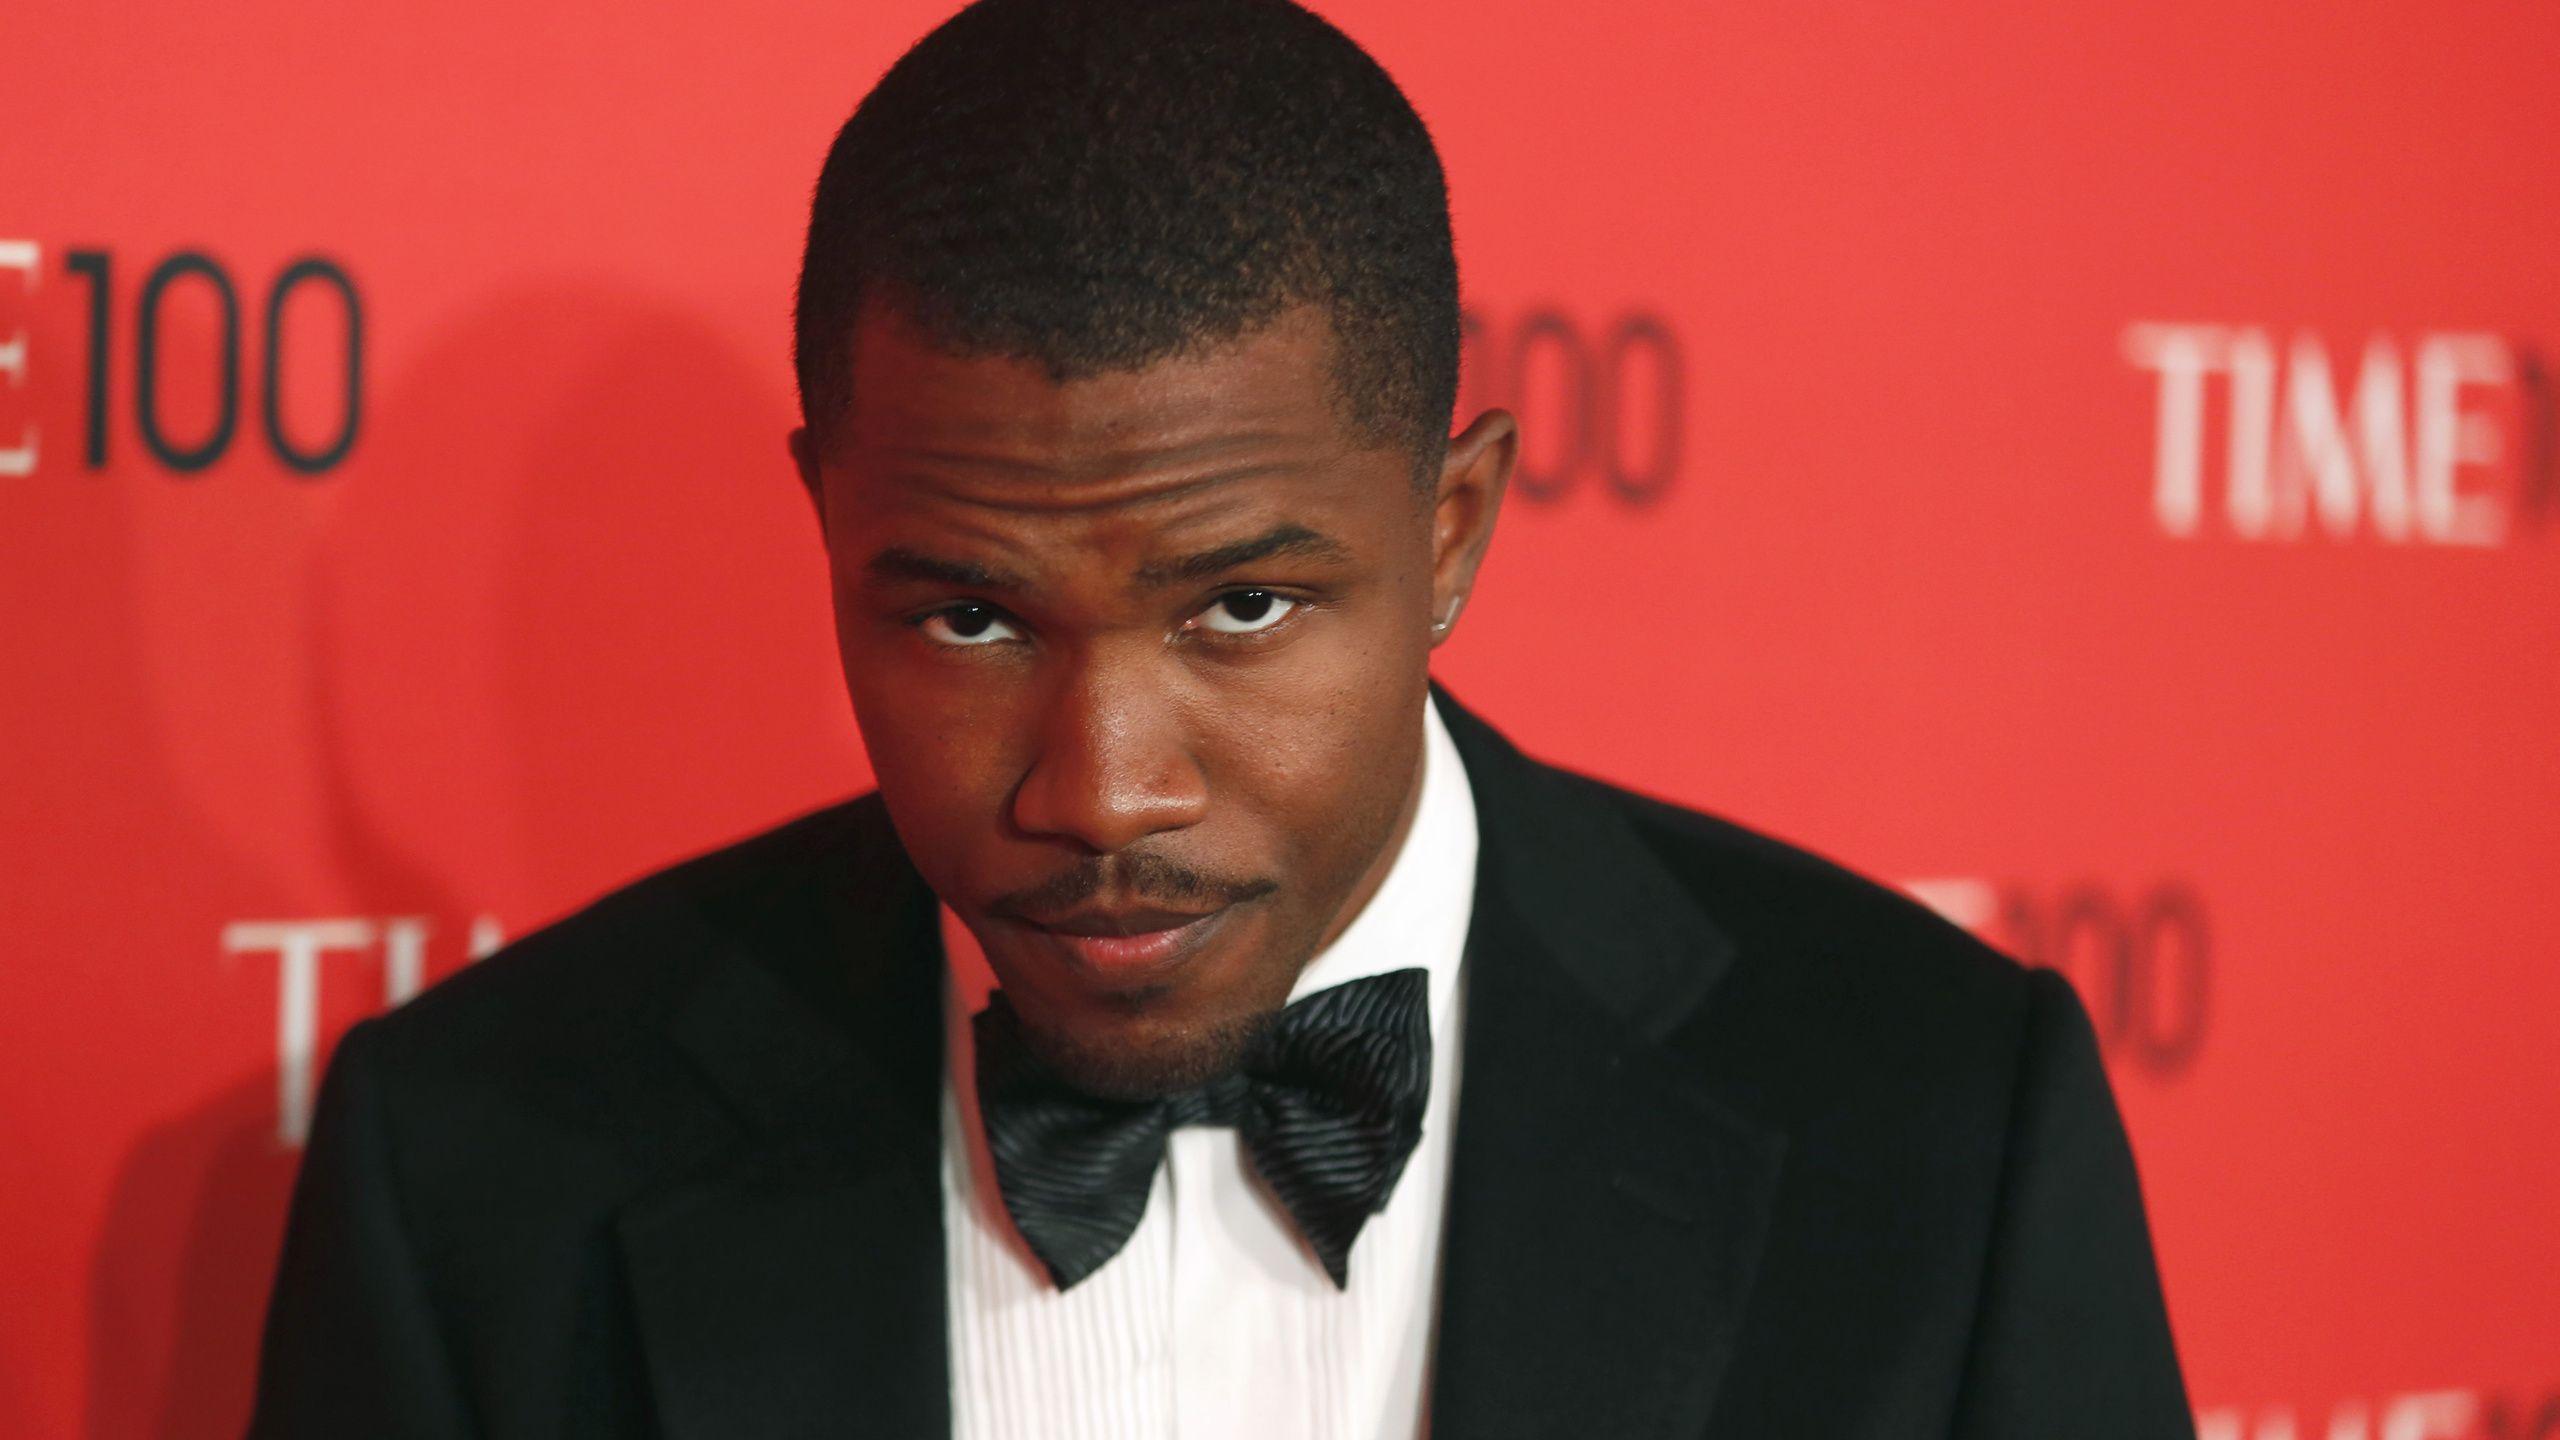 Frank Ocean Wallpapers Image Photos Pictures Backgrounds